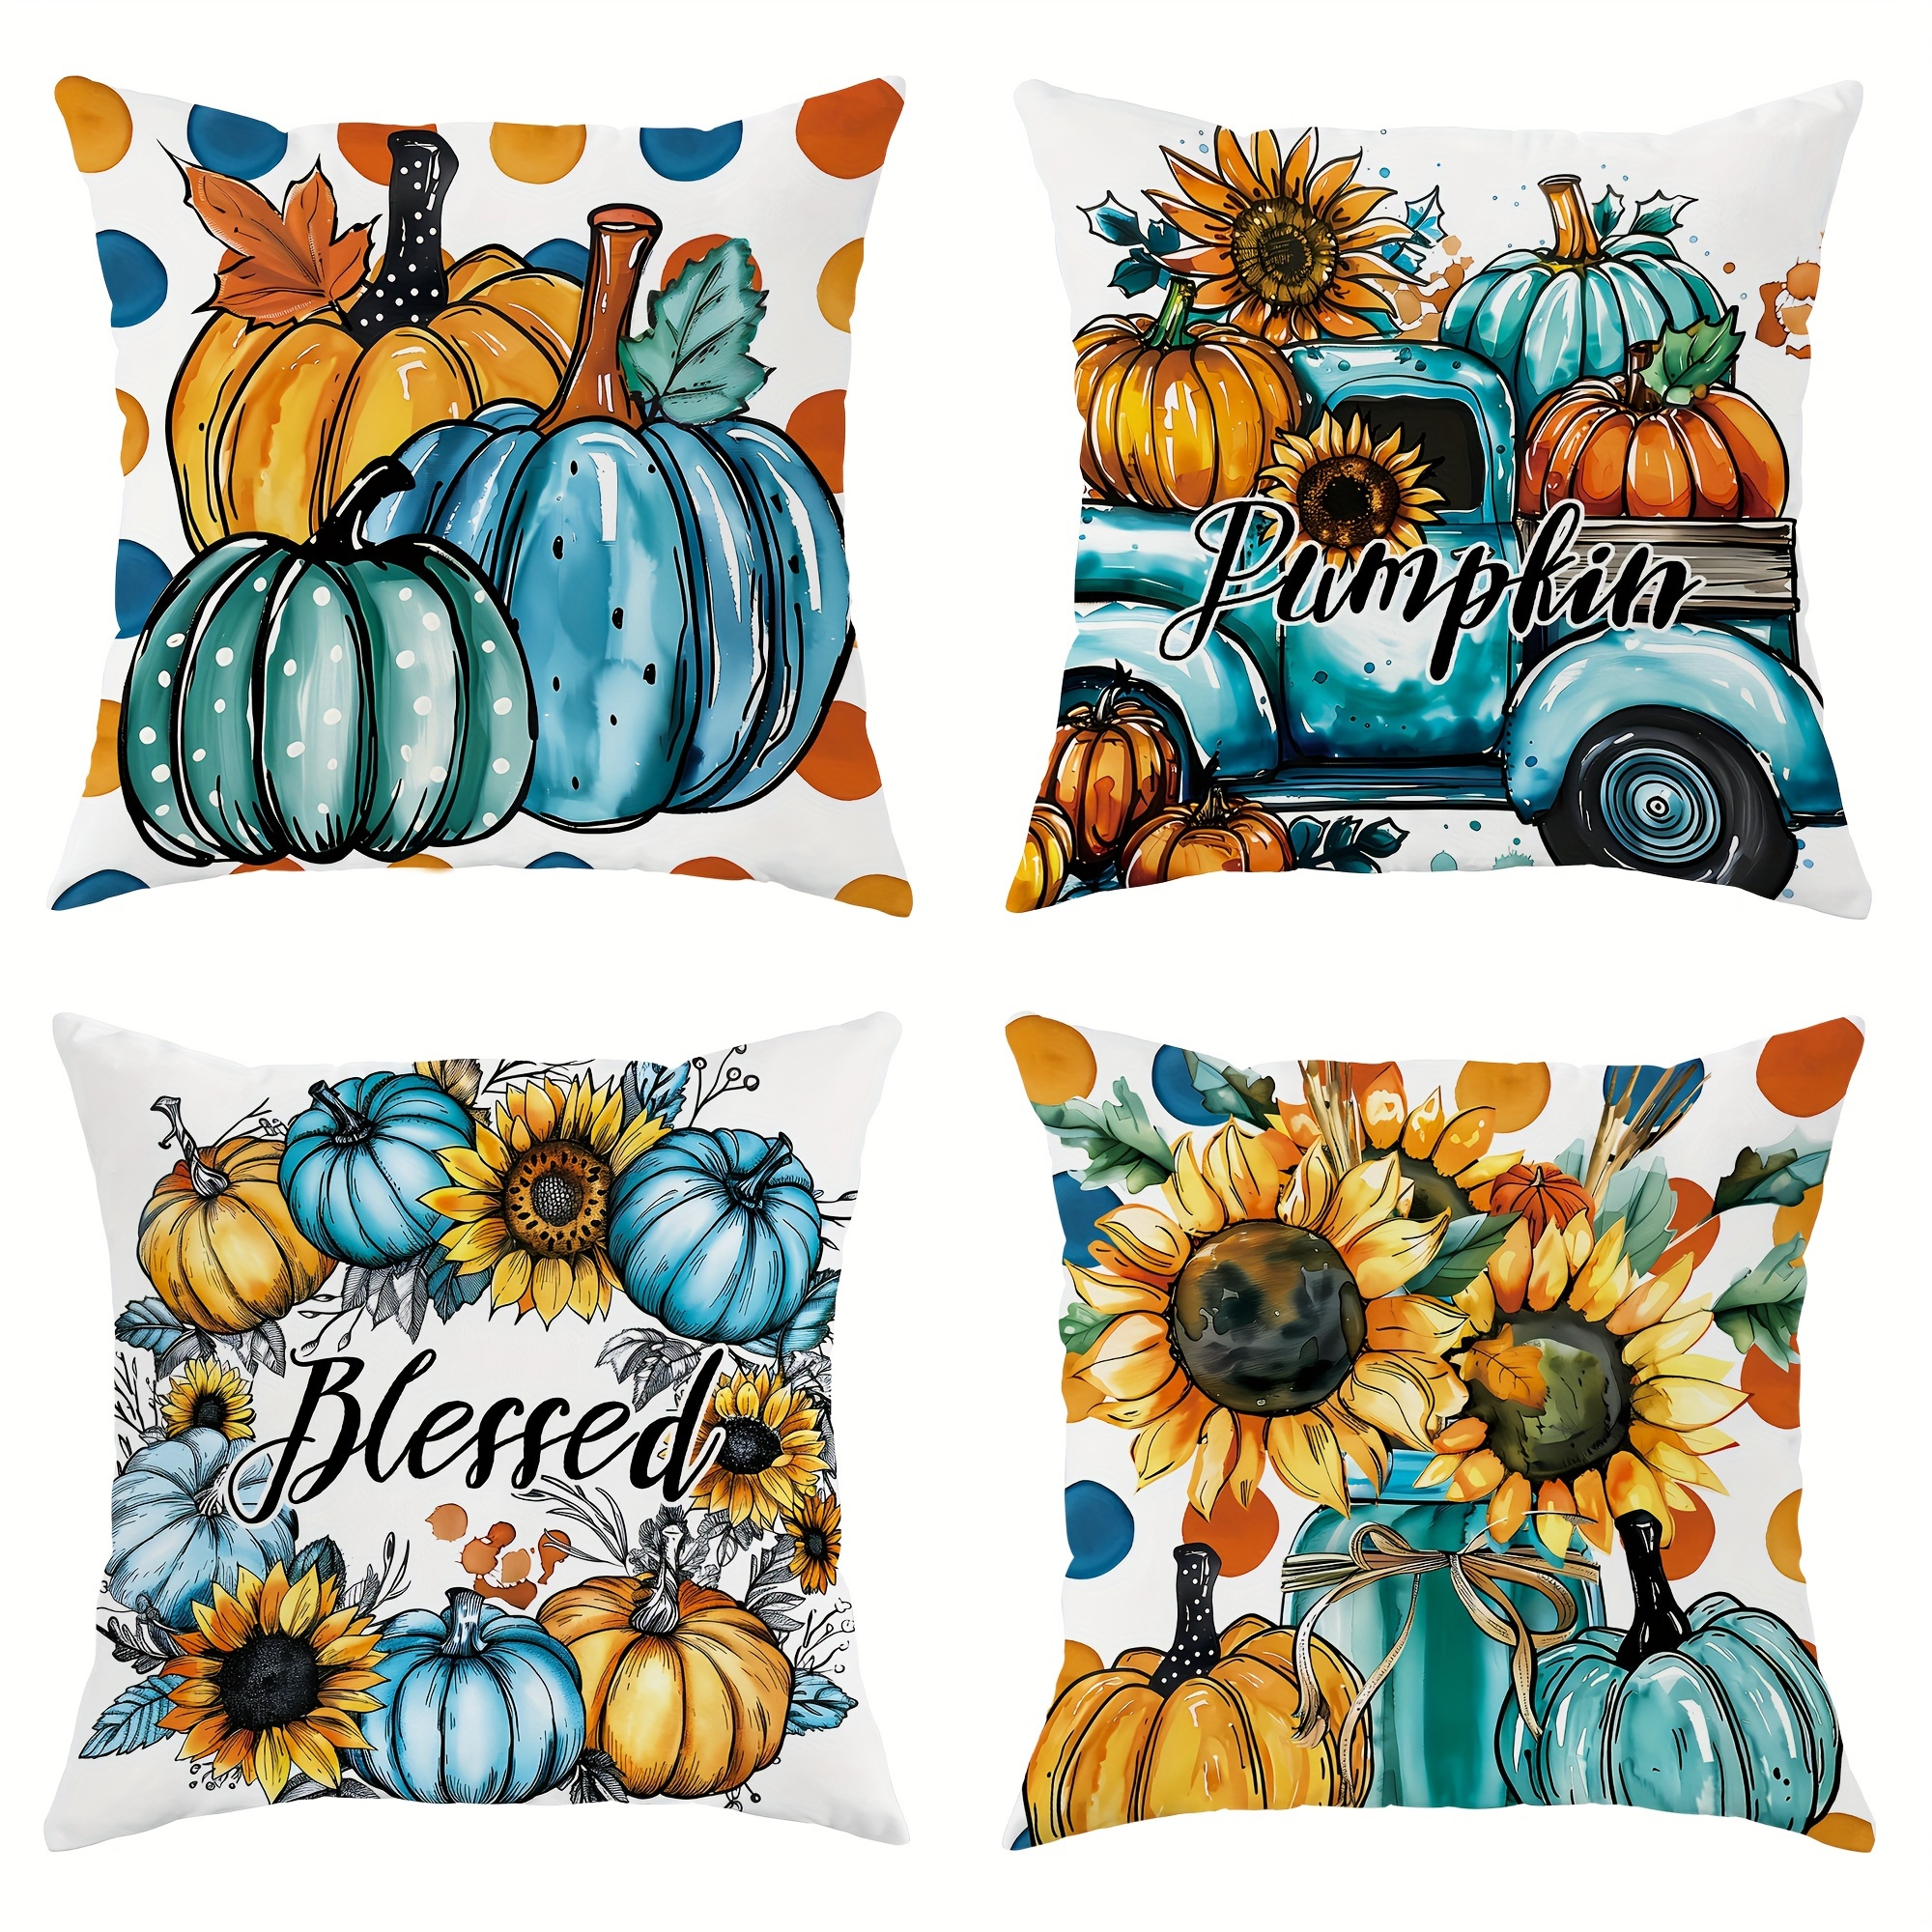 

4 Pack Country-rustic Fall Throw Pillow Covers, 18x18 Inch, Polyester, Machine Washable, Zipper Closure, Farmhouse Pumpkin Truck Sunflower Design For Living Room Sofa Bed Decor